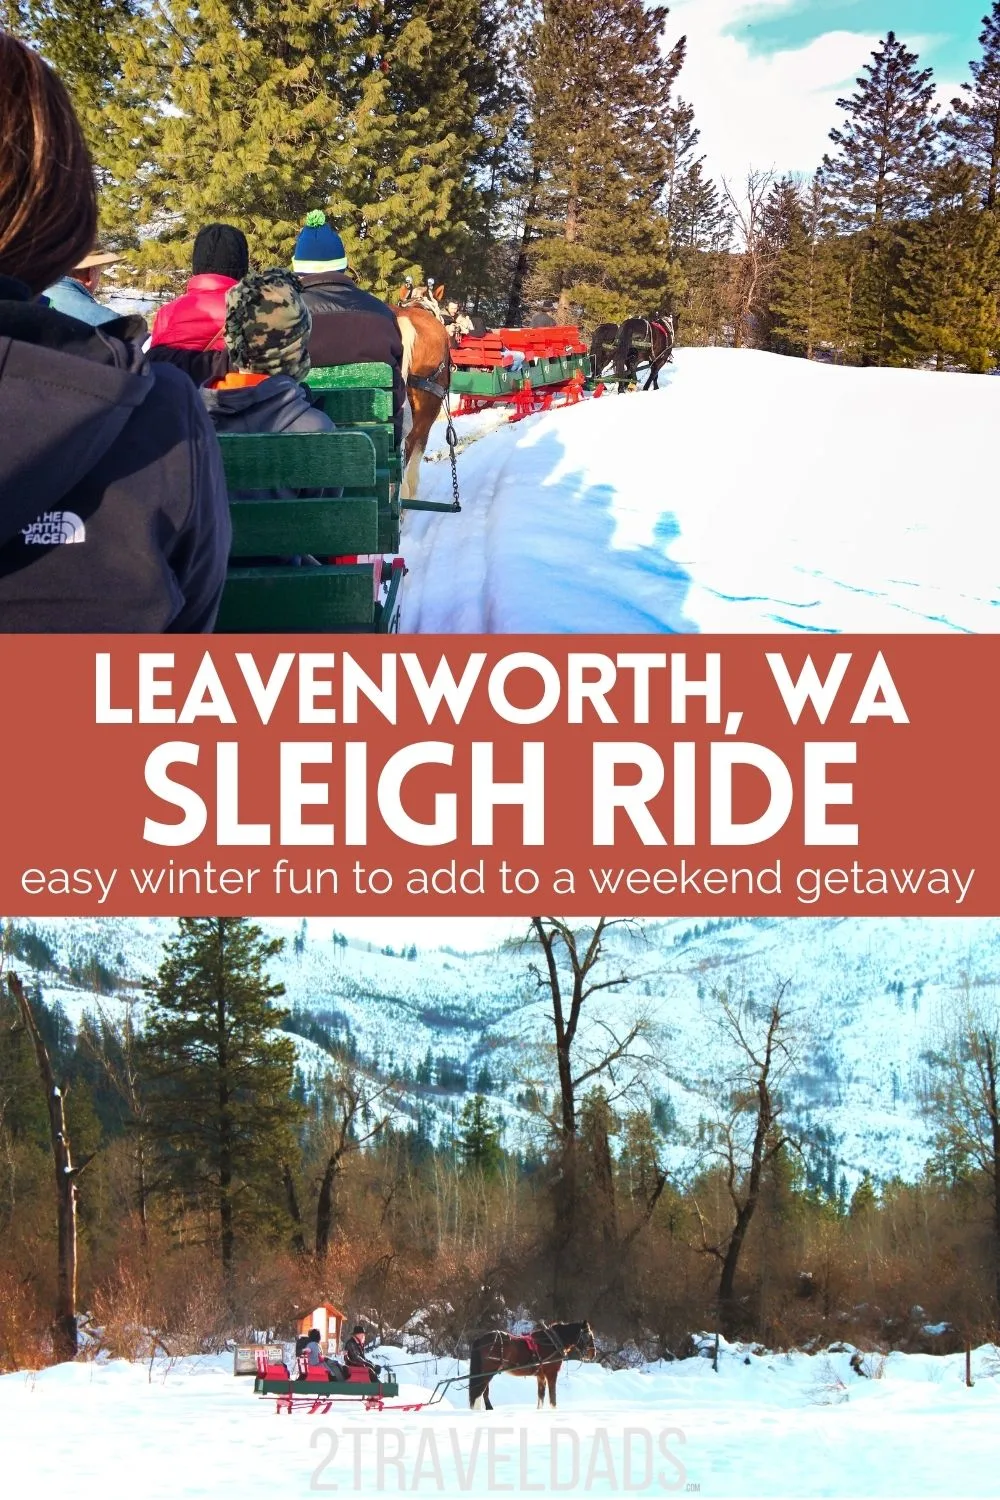 A sleigh ride is the perfect addition to a trip to Leavenworth, Washington. See what to expect and how to plan for getting out on the snow with kids during the Pacific Northwest winter.